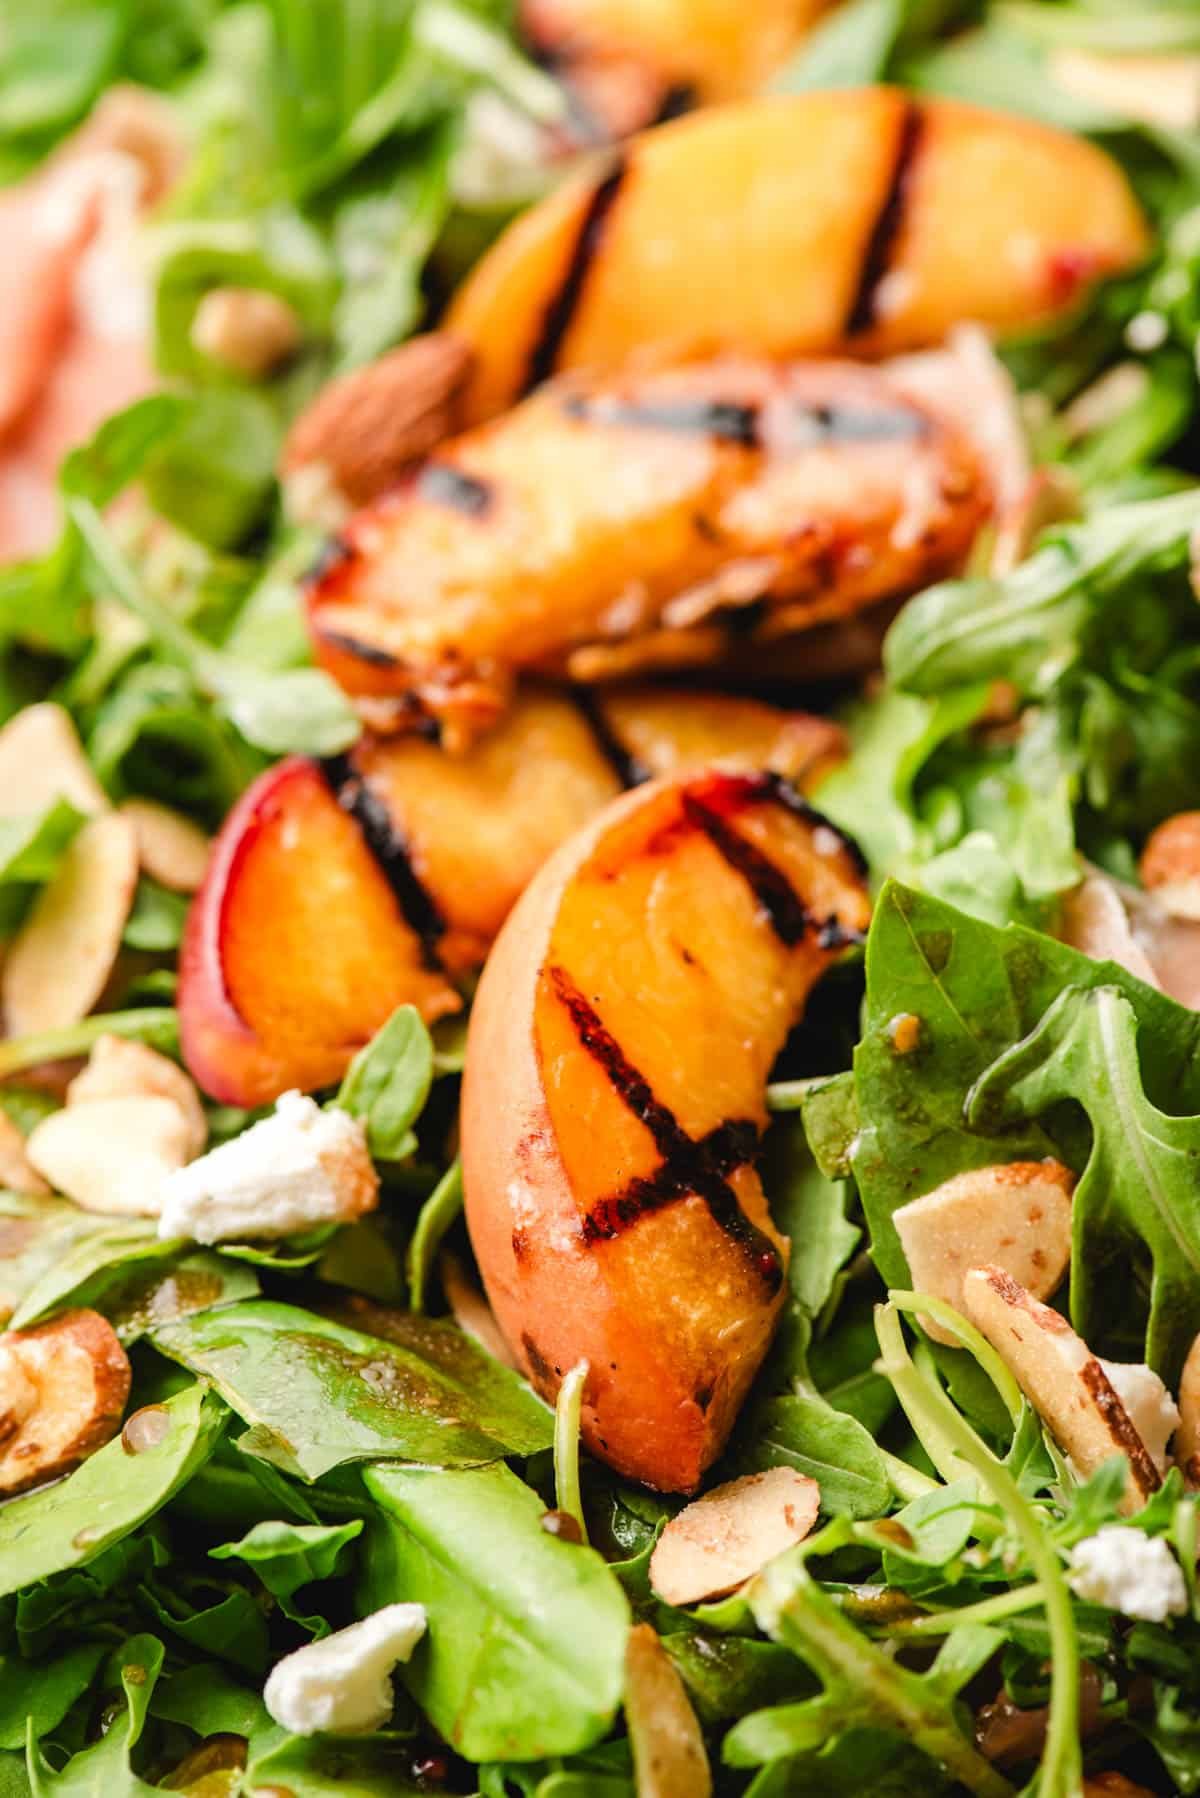 Grilled peach slices with salad greens.